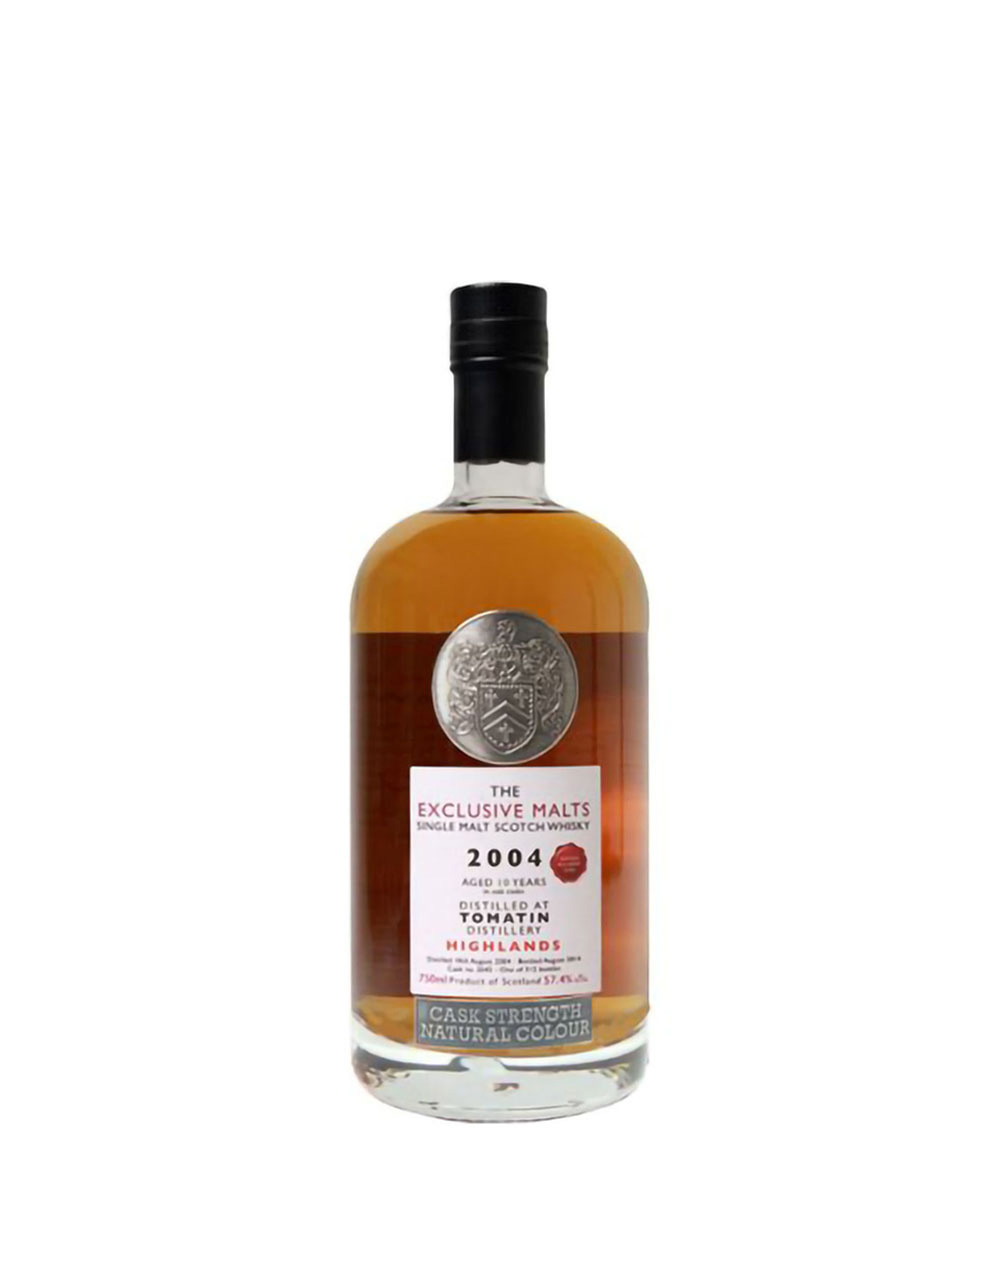 Exclusive Malts Tomatin 10 Year Old Cask Strength Single Malt Scotch Whisky